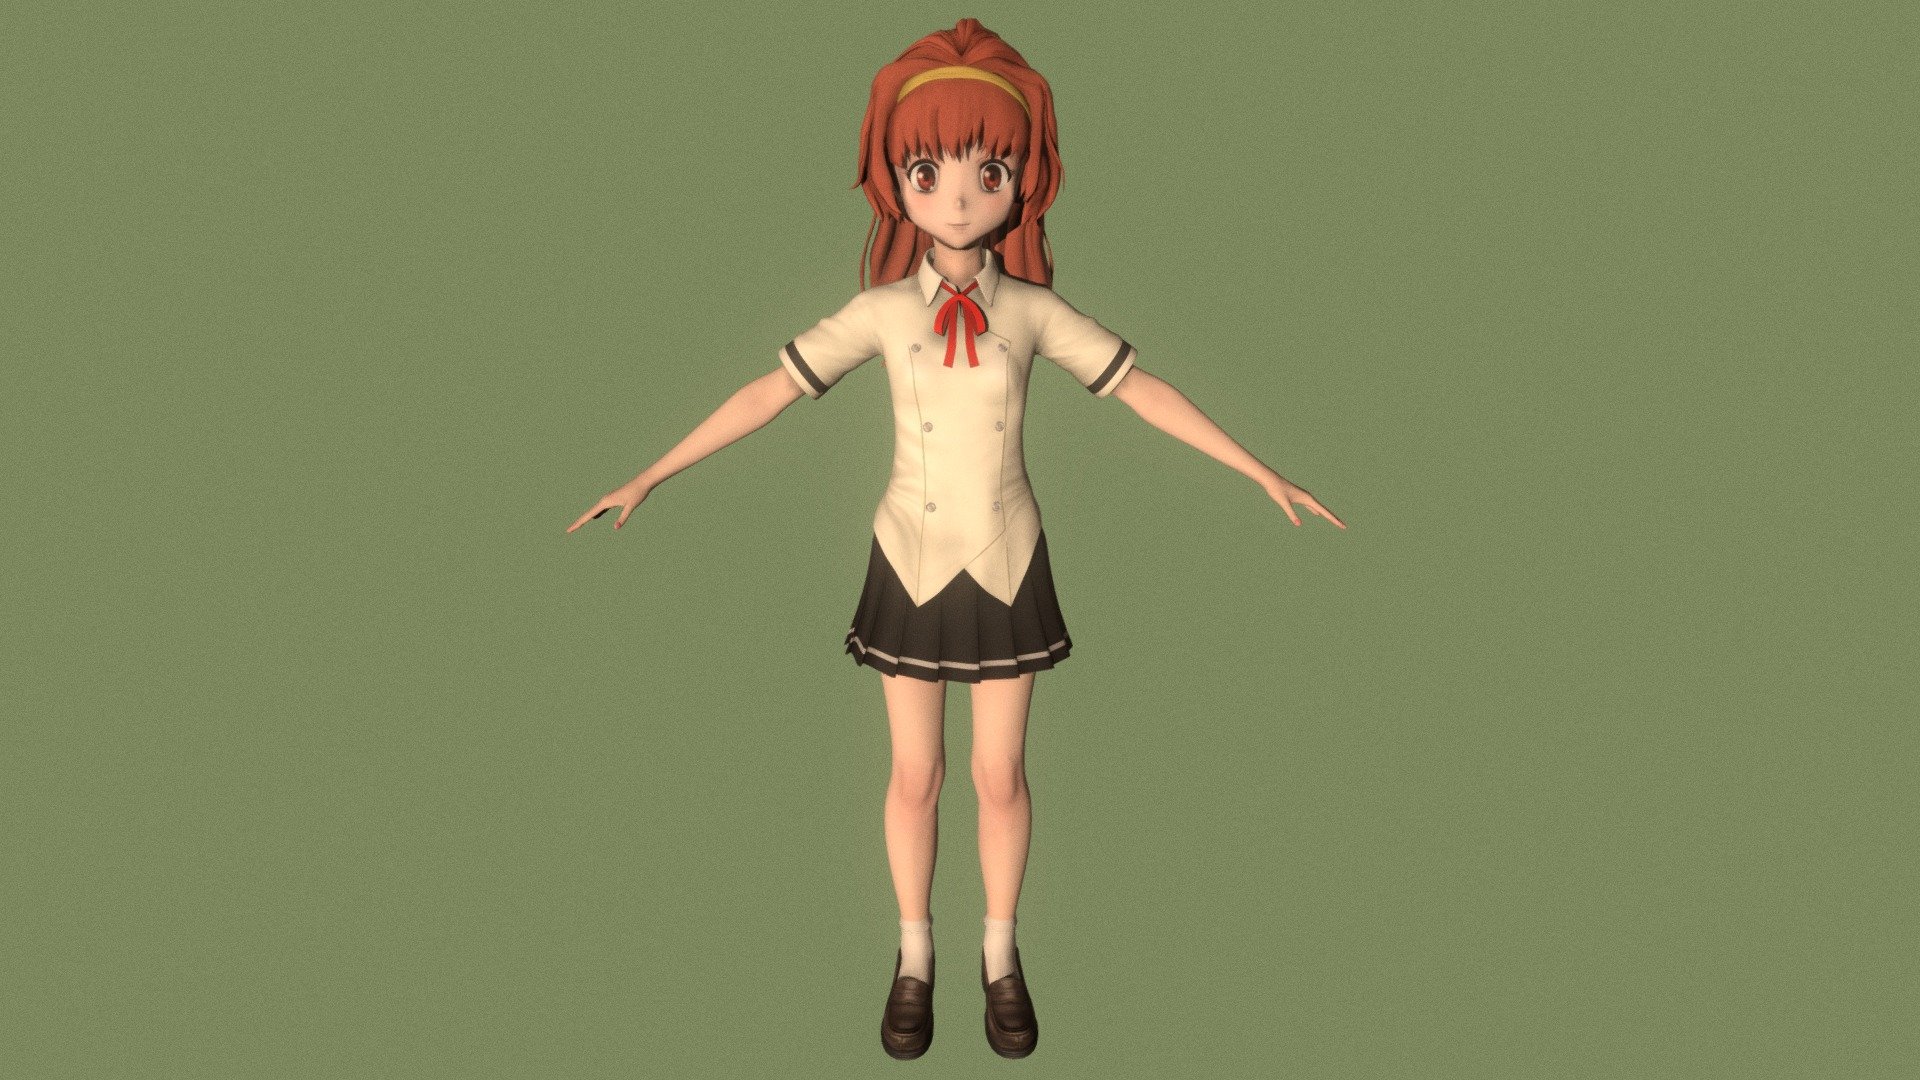 T-pose rigged model of anime girl Arisa Takanomiya  (Oniai). 

Body and clothings are rigged and skinned by 3ds Max CAT system. 

Eye direction and facial animation controlled by Morpher modifier / Shape Keys / Blendshape.

This product include .FBX (ver. 7200) and .MAX (ver. 2010) files. 

3ds Max version is turbosmoothed to give a high quality render (as you can see here). 

Original main body mesh have ~7.000 polys. 

This 3D model may need some tweaking to adapt the rig system to games engine and other platforms.

I support convert model to various file formats (the rig data will be lost in this process): 3DS; AI; ASE; DAE; DWF; DWG; DXF; FLT; HTR; IGS; M3G; MQO; OBJ; SAT; STL; W3D; WRL; X.

You can buy all of my models in one pack to save cost: https://sketchfab.com/3d-models/all-of-my-anime-girls-c5a56156994e4193b9e8fa21a3b8360b

And I can make commission models.

If you have any questions, please leave a comment or contact me via my email  3d.eden.project@gmail.com 3d model